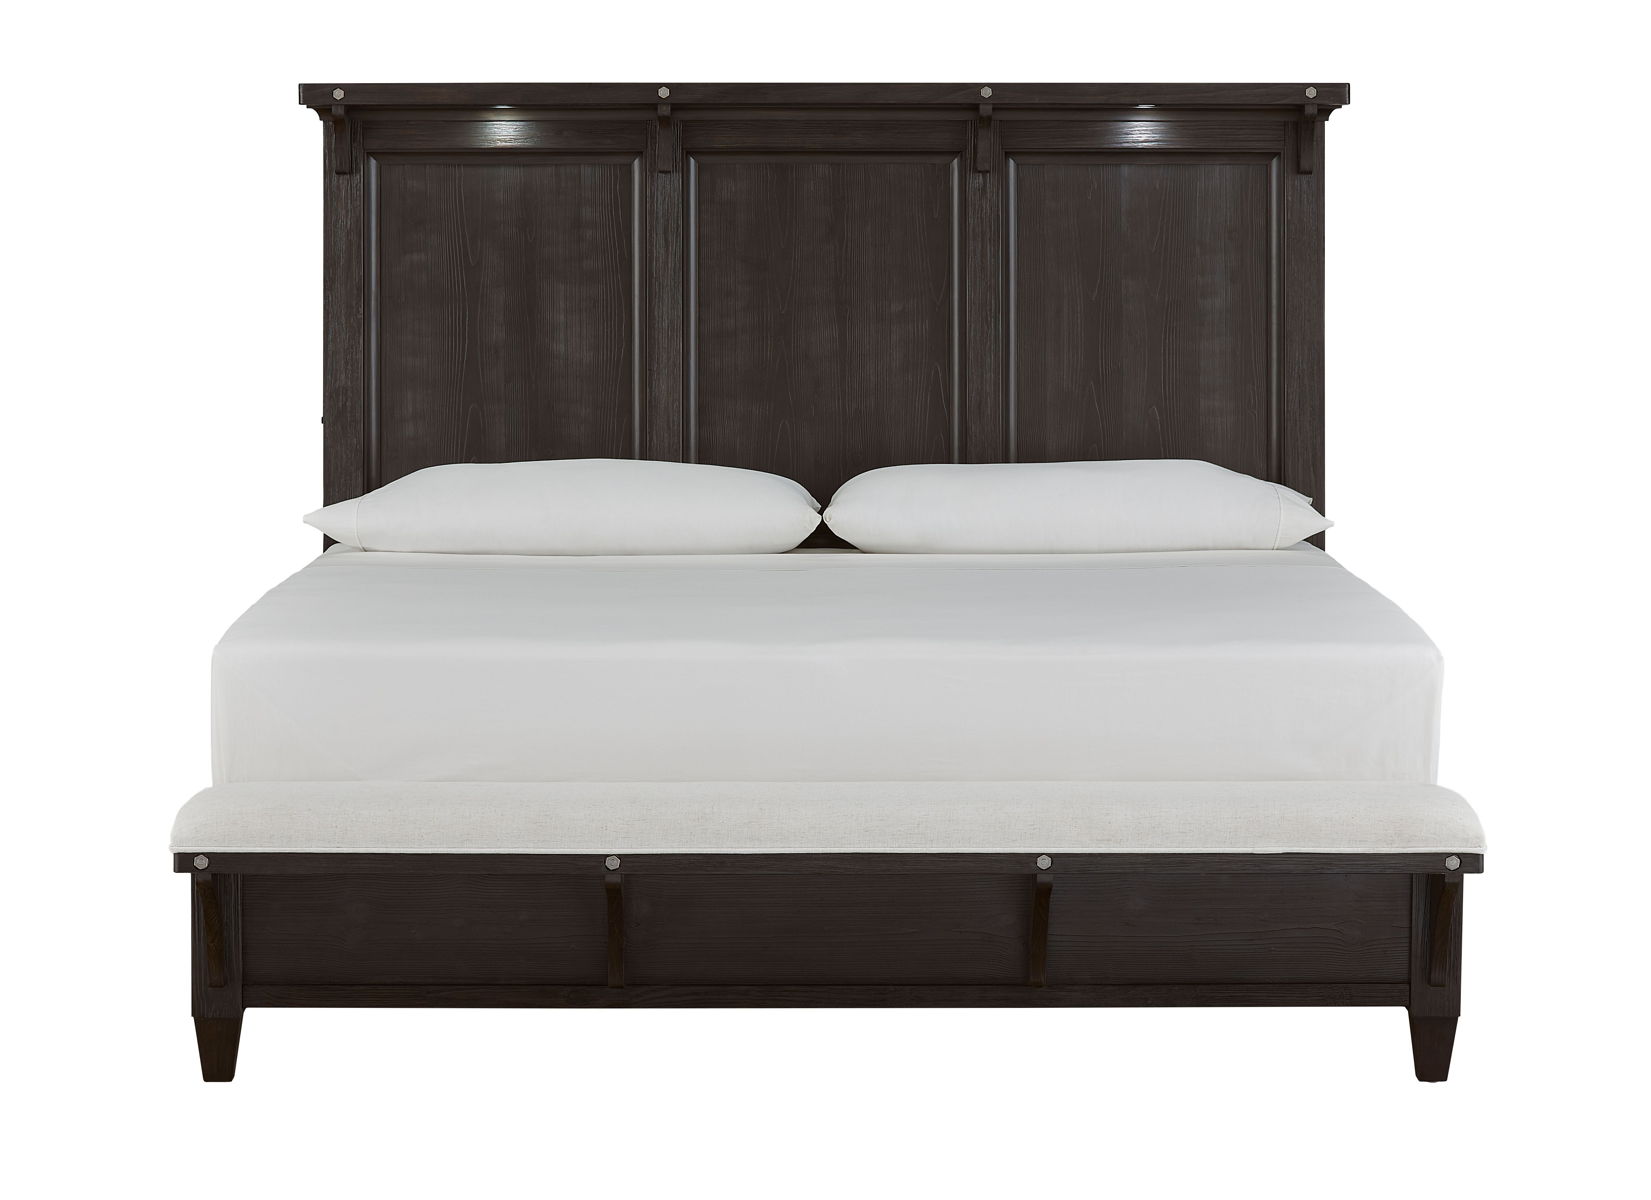 Sierra - Complete Lighted Panel Bed With Upholstered Footboard